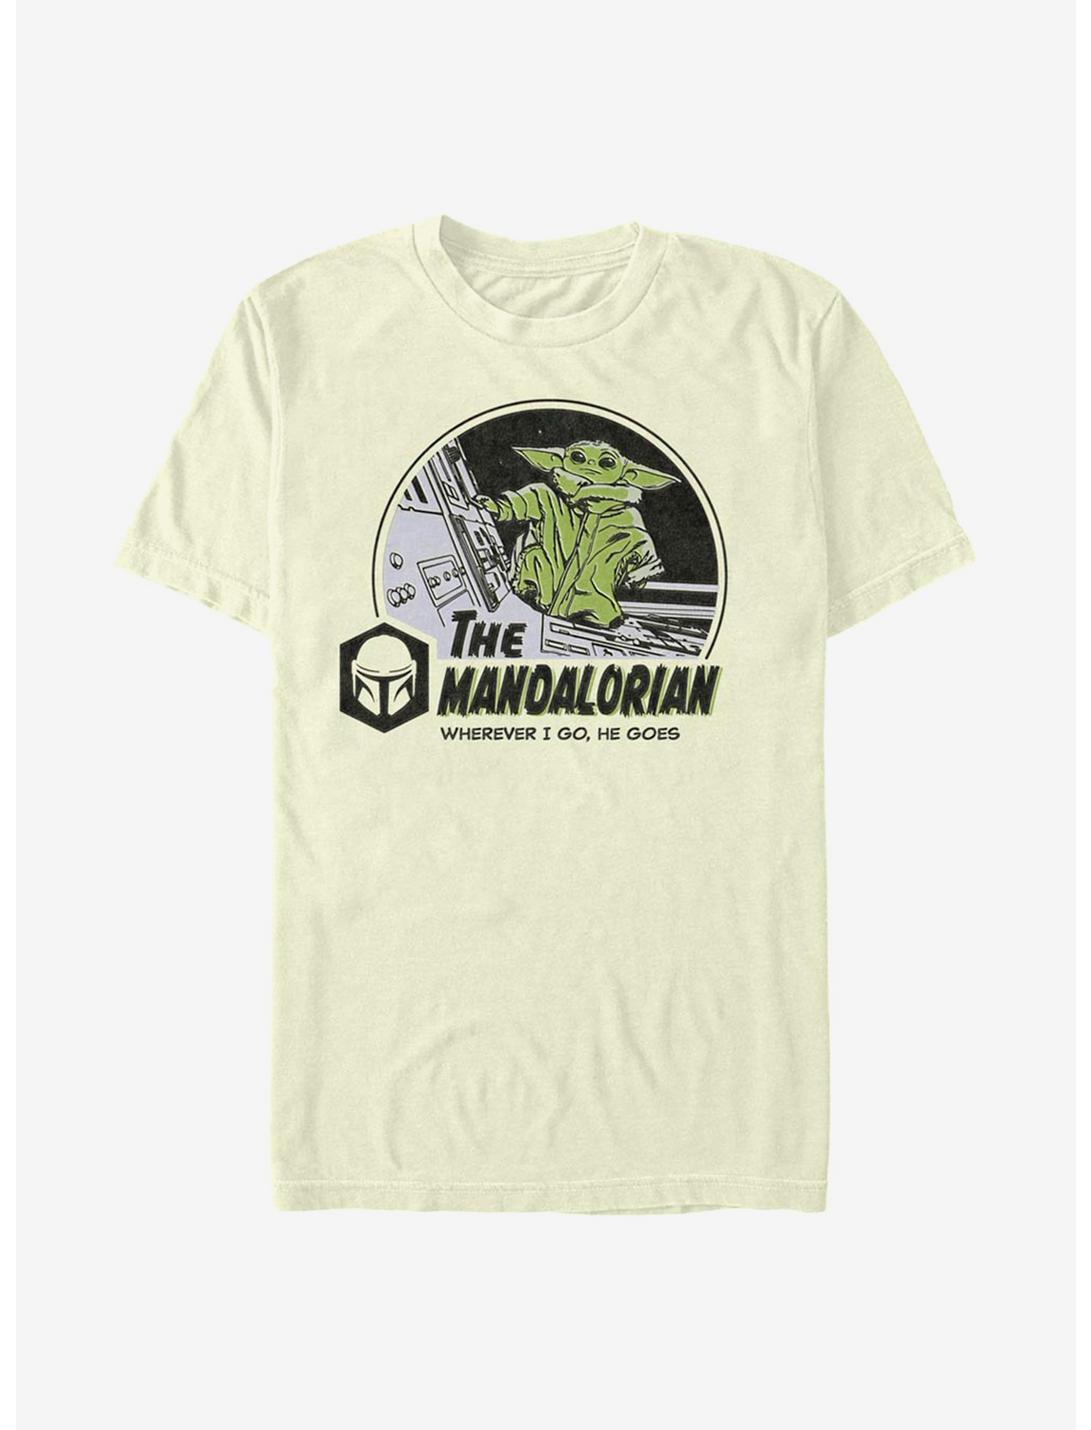 Star Wars The Mandalorian The Child In Space T-Shirt, NATURAL, hi-res